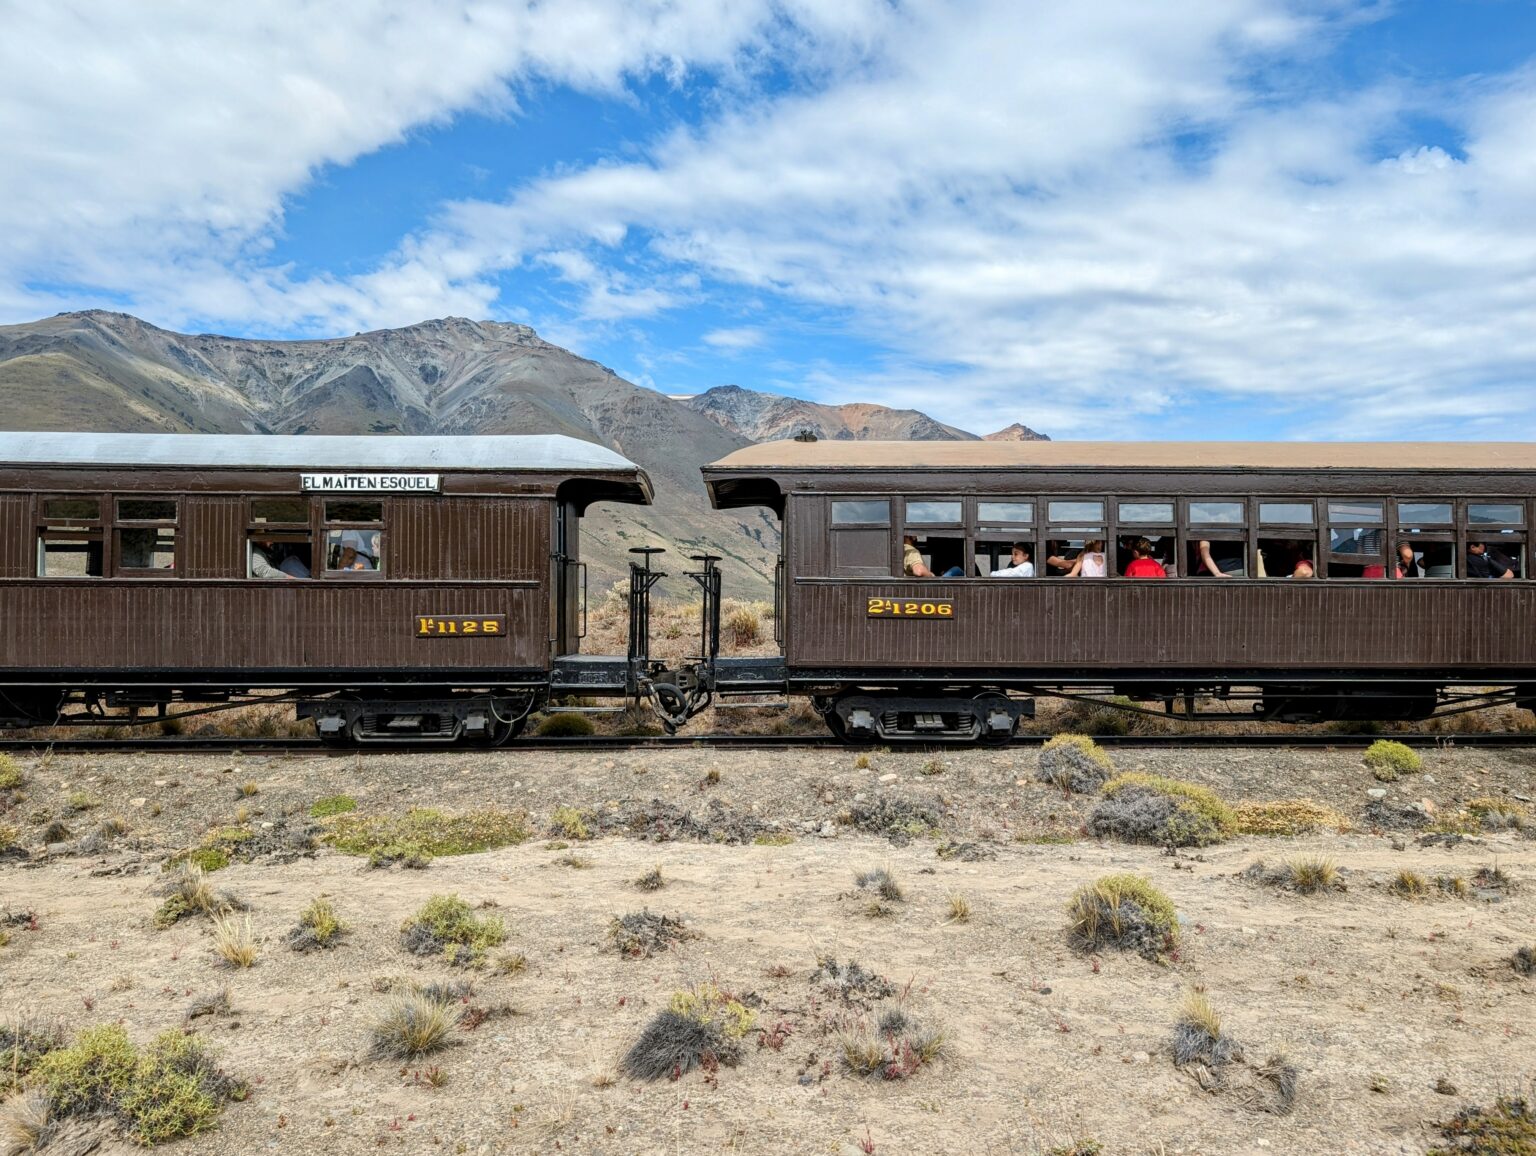 Two train cars sitting on a desert landscape